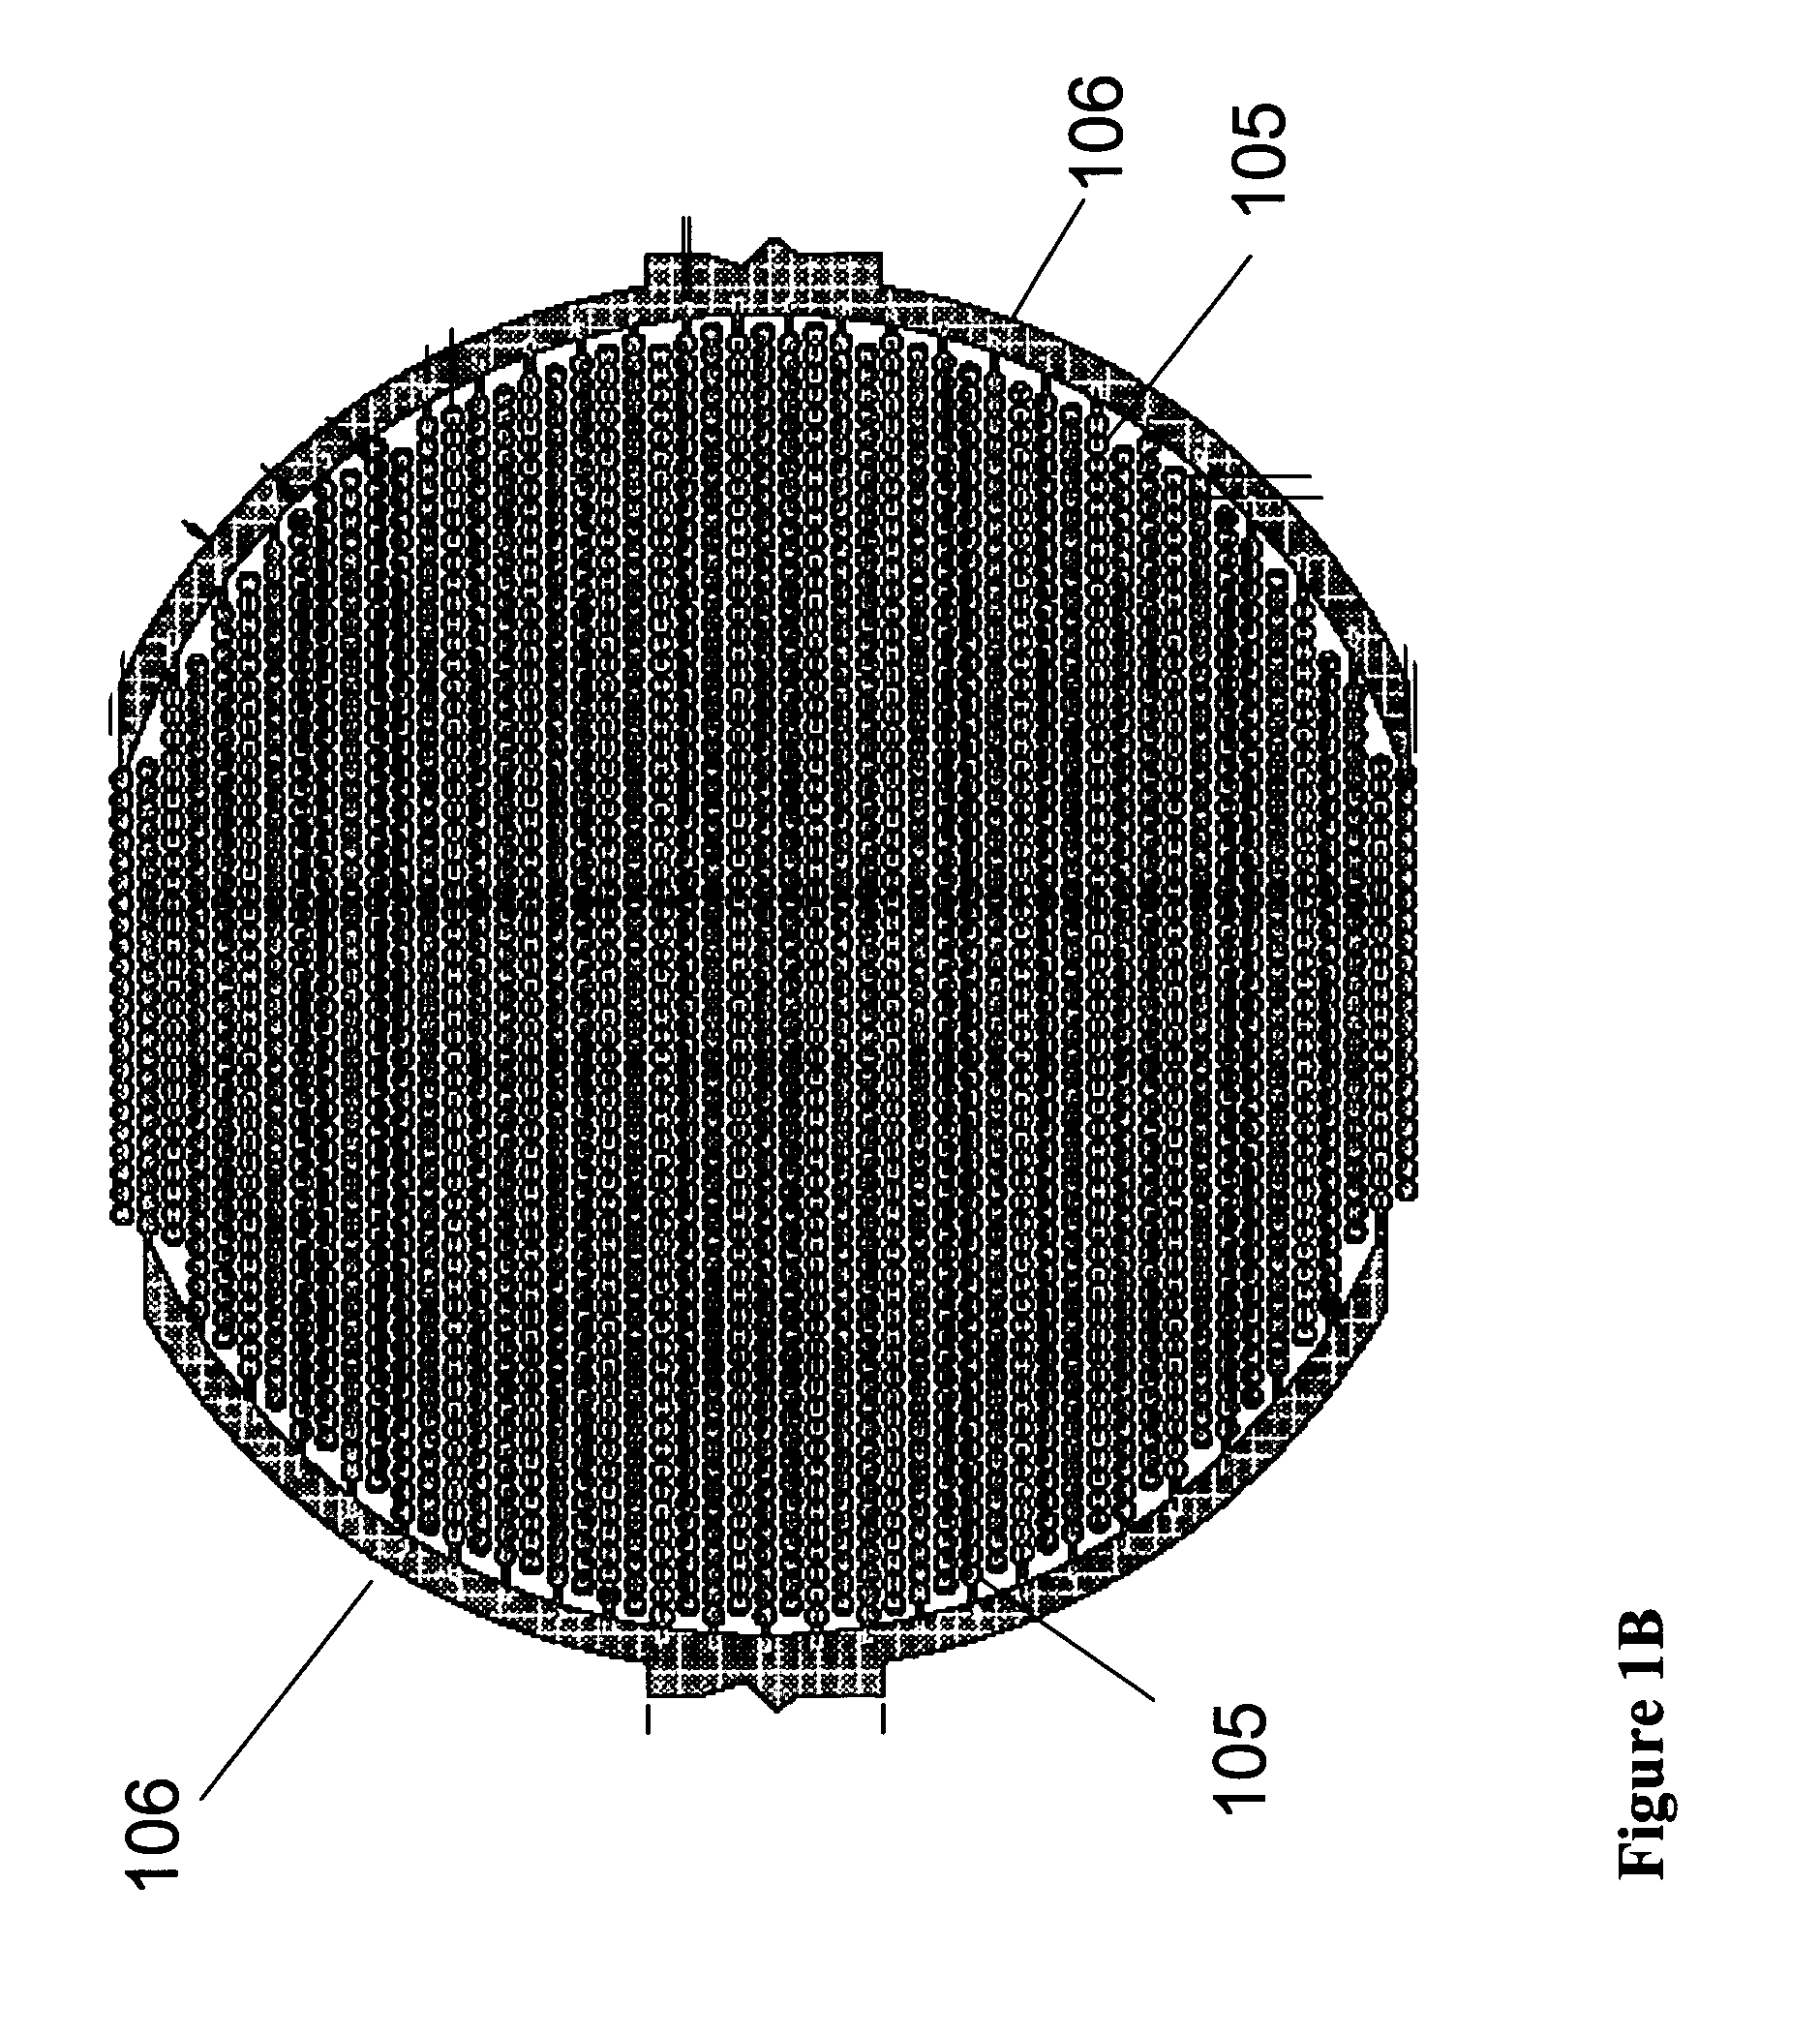 Real time electronic cell sensing system and applications for cytotoxicity profiling and compound assays